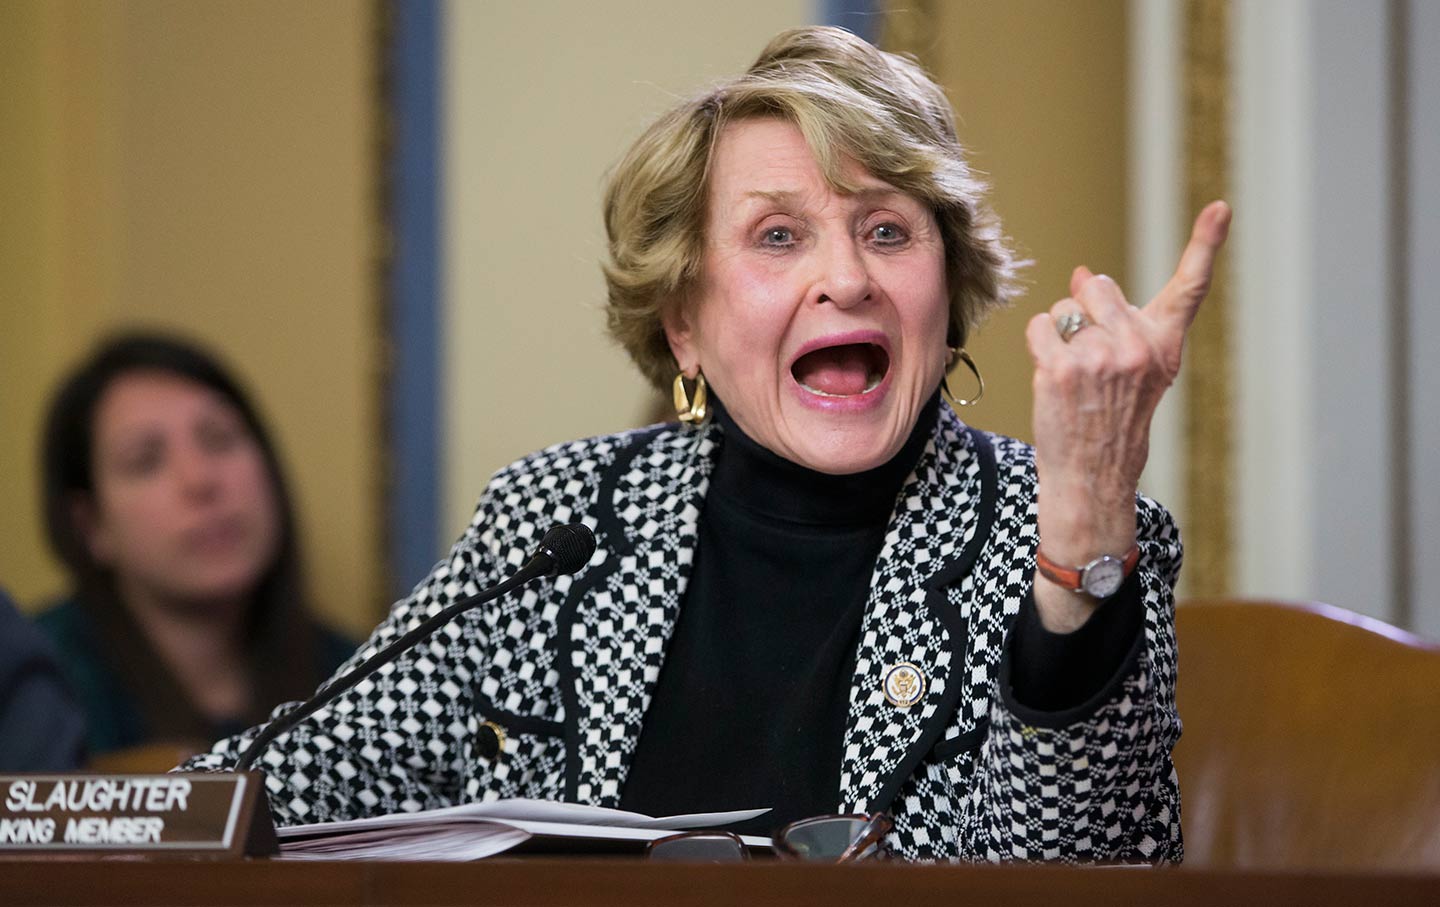 Louise Slaughter—Feminist, Environmentalist, Media Reformer, and Champion of Economic Justice